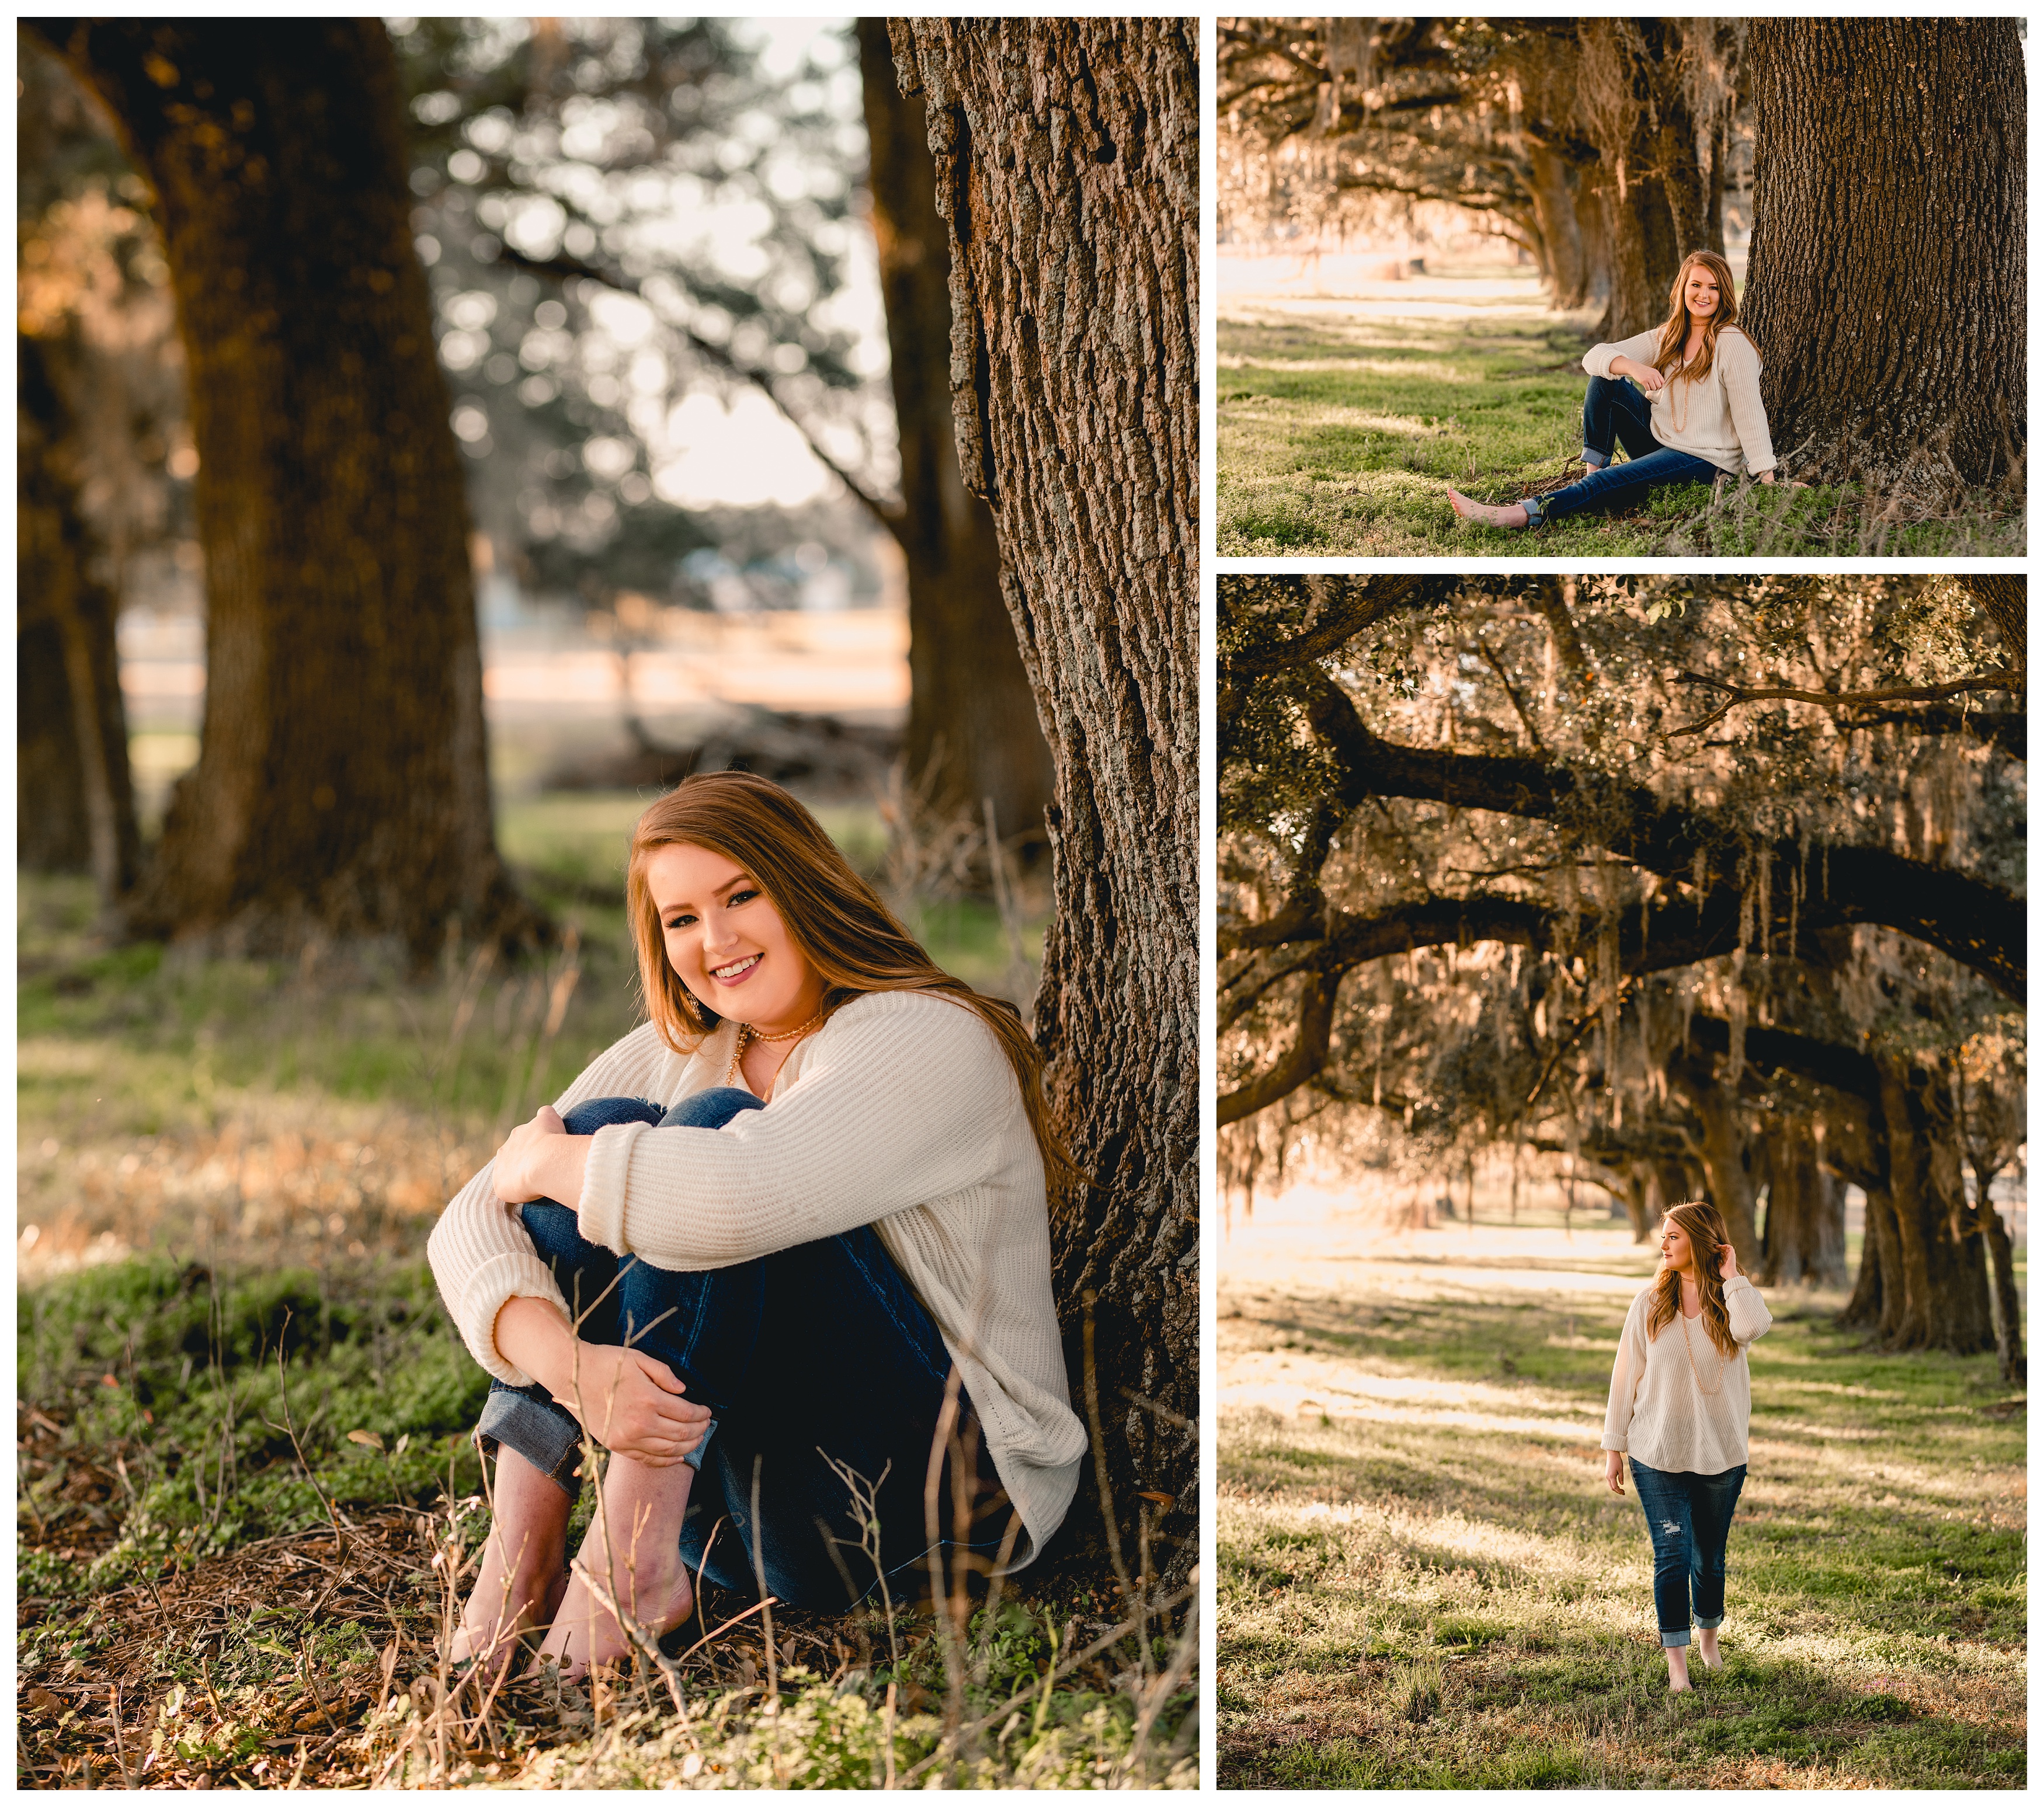 Senior photos that are fun and natural in the North Florida/South Georgia area. Shelly Williams Photography